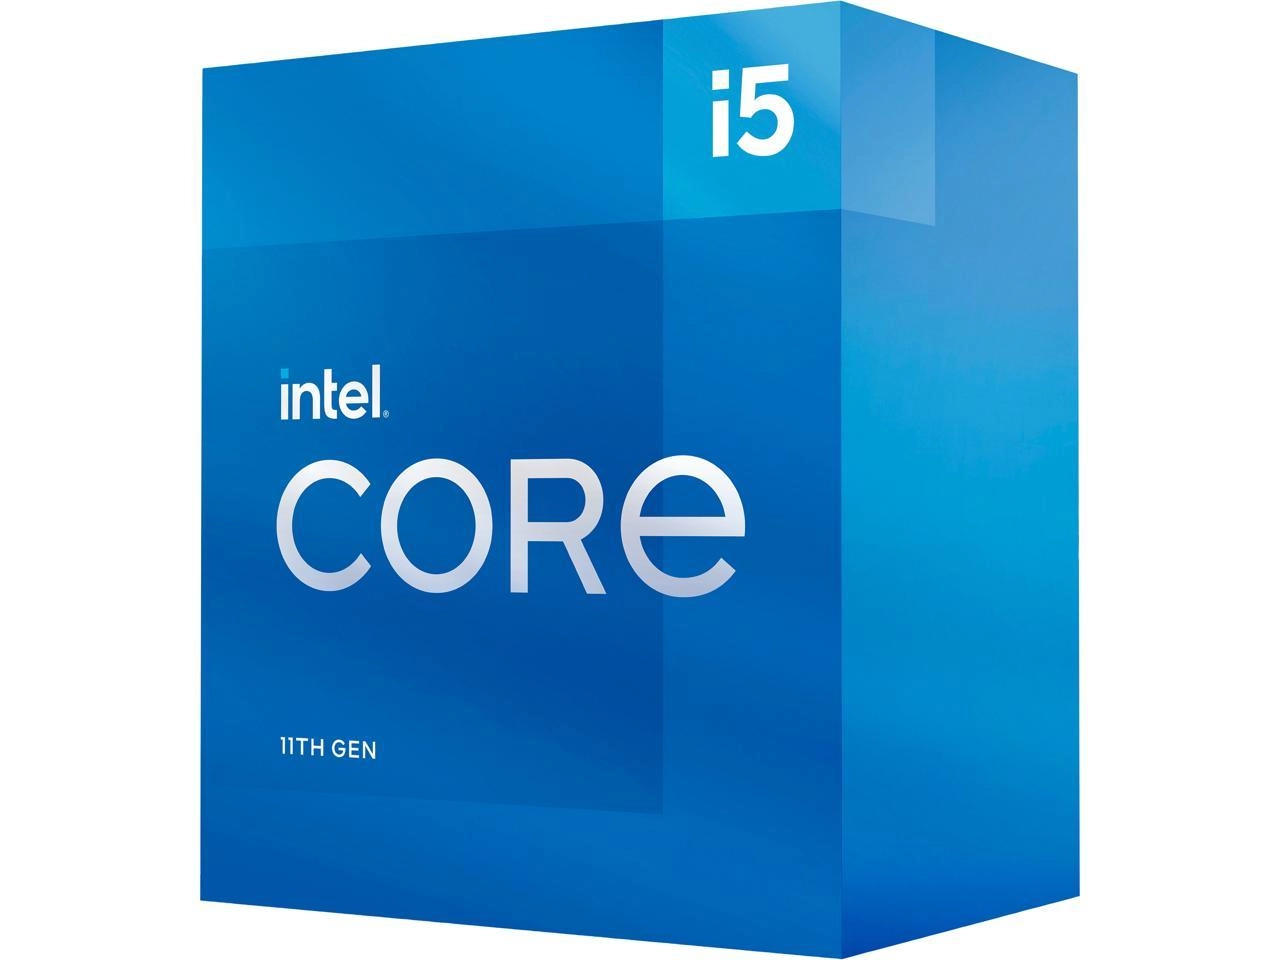 Intel® Core™ i5-11600K, S1200, 3.9-4.9GHz (6C/12T), 12MB Cache, Intel® UHD Graphics 750, 14nm 125W, Retail (without cooler)